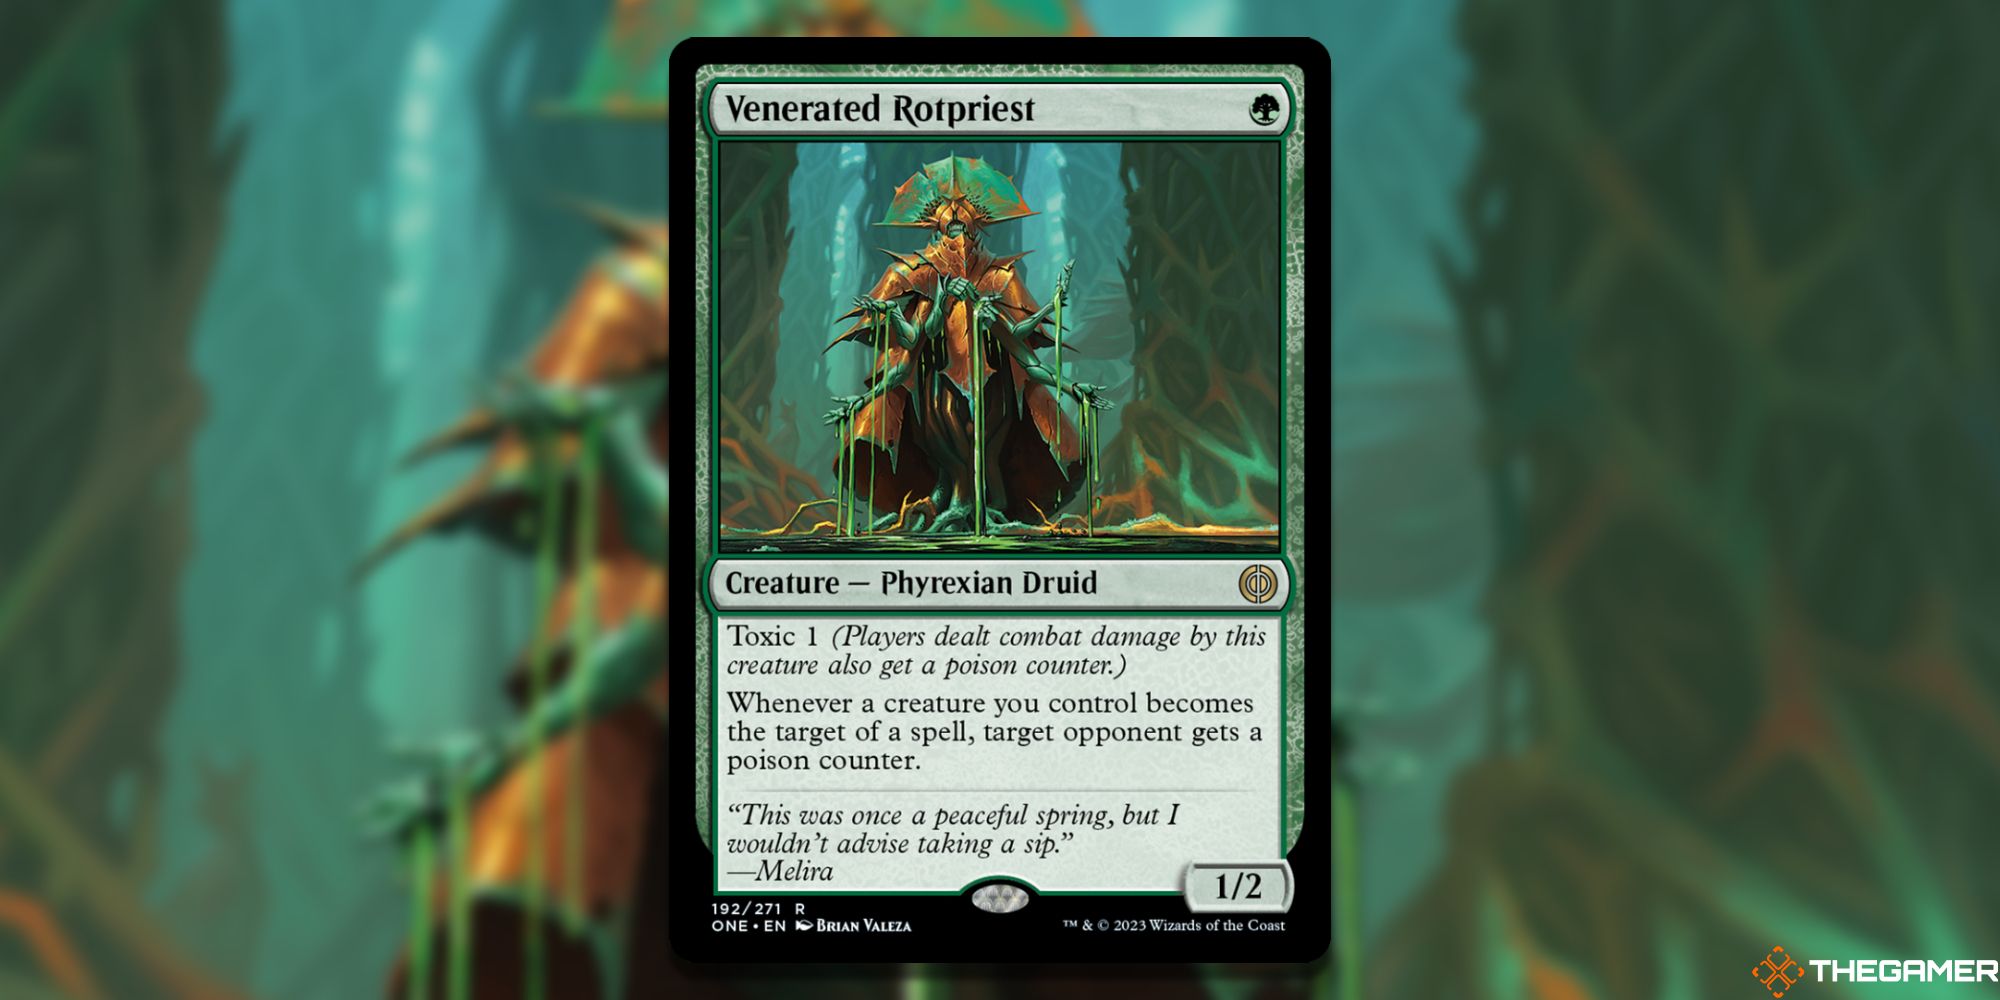 The card Venerated Rotpriest from Magic: The Gathering.